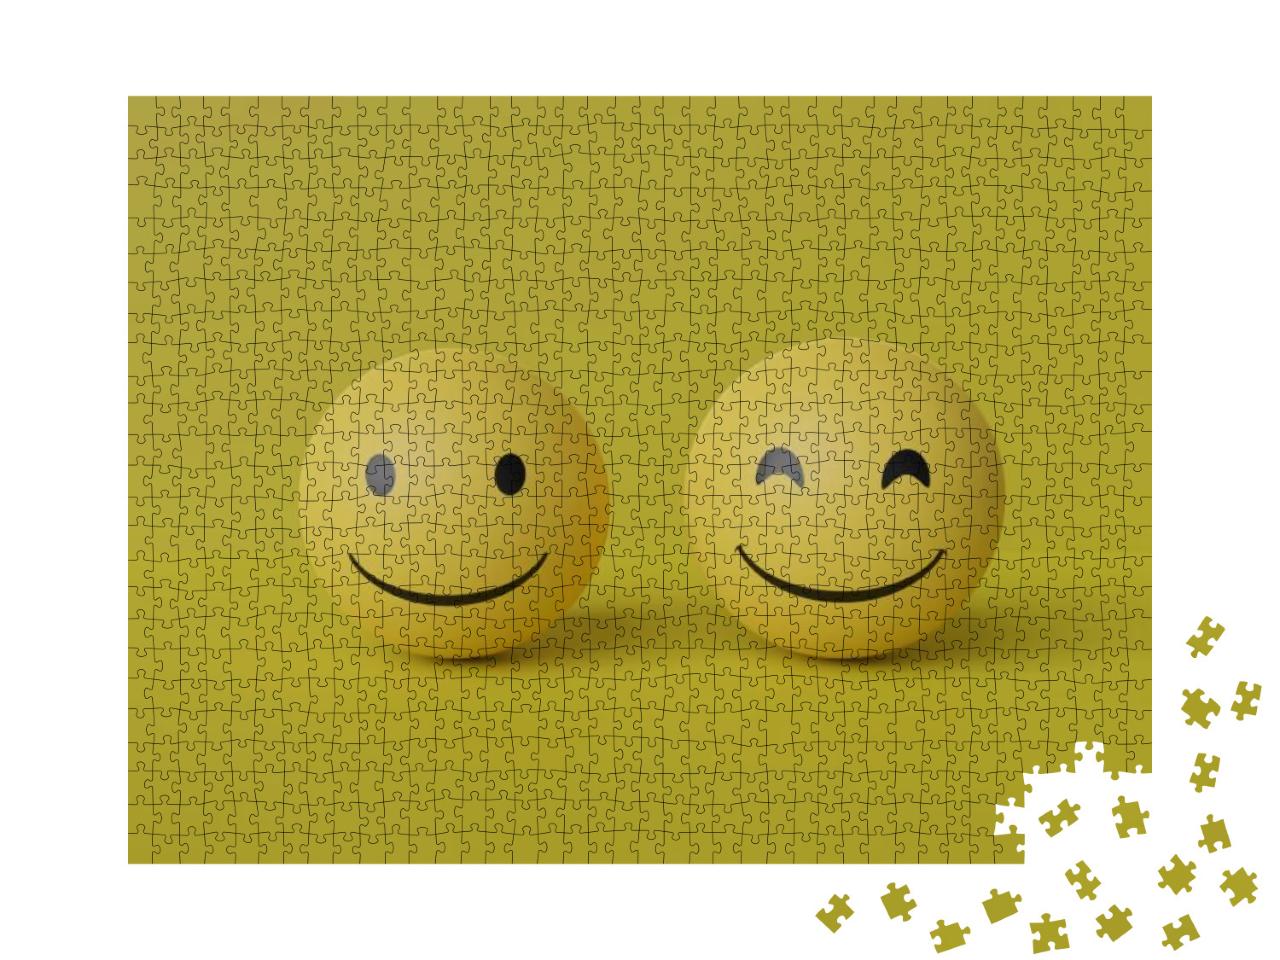 Smile Emoji with Yellow Background 3D Rendering... Jigsaw Puzzle with 1000 pieces